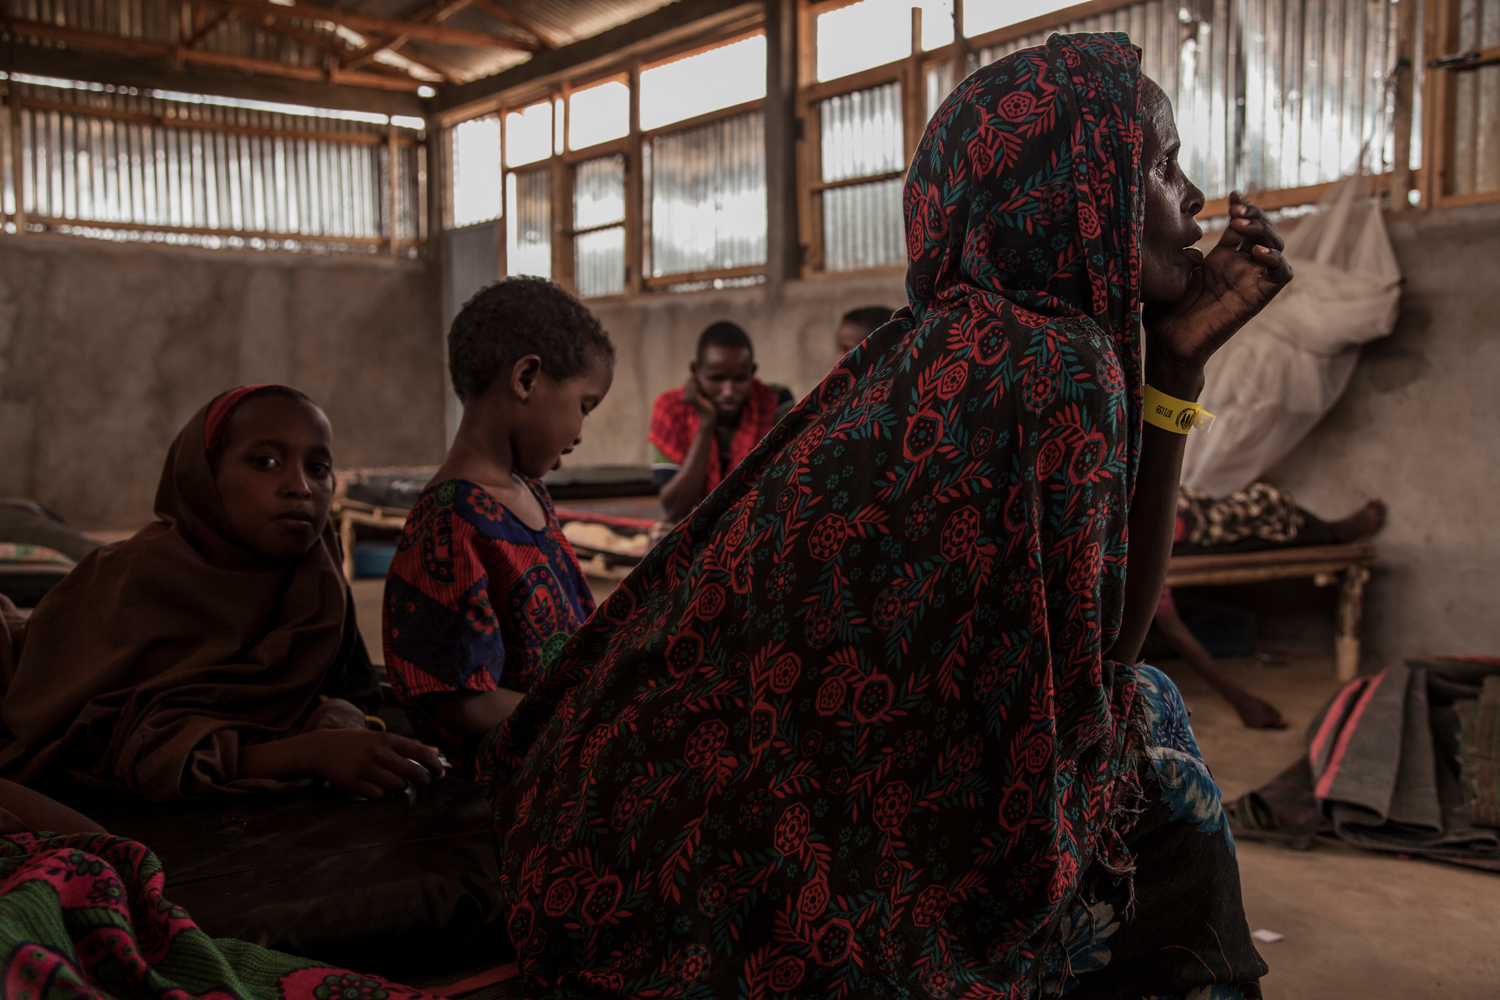 Ethiopia. Aisha and her seven children have left everything behind looking for safety